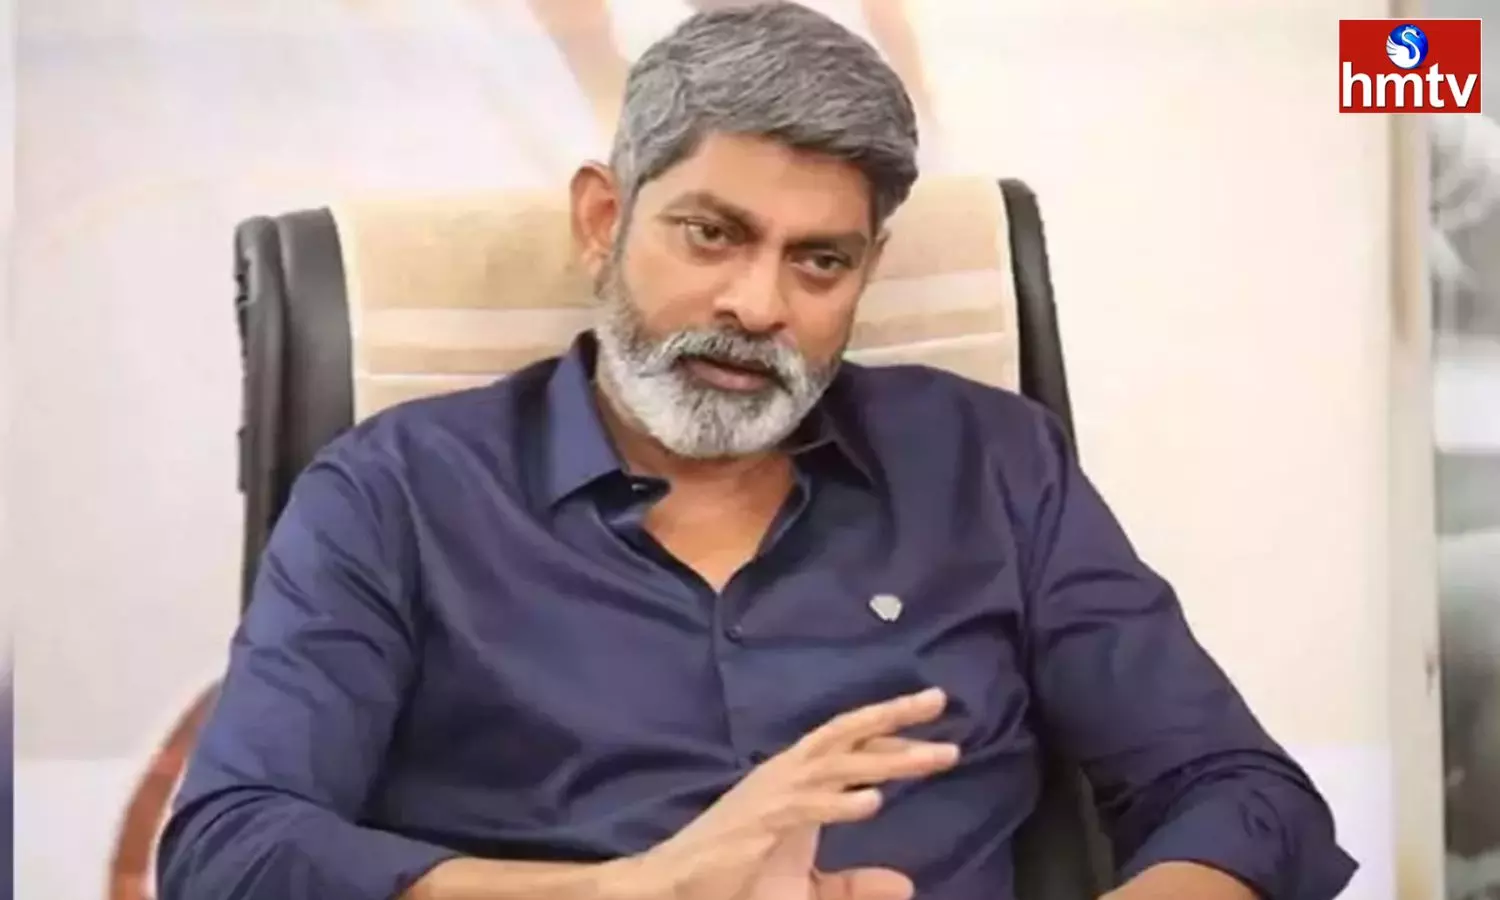 Jagapathi Babu Announced Cutting Ties with the Fans Associations and the Trust